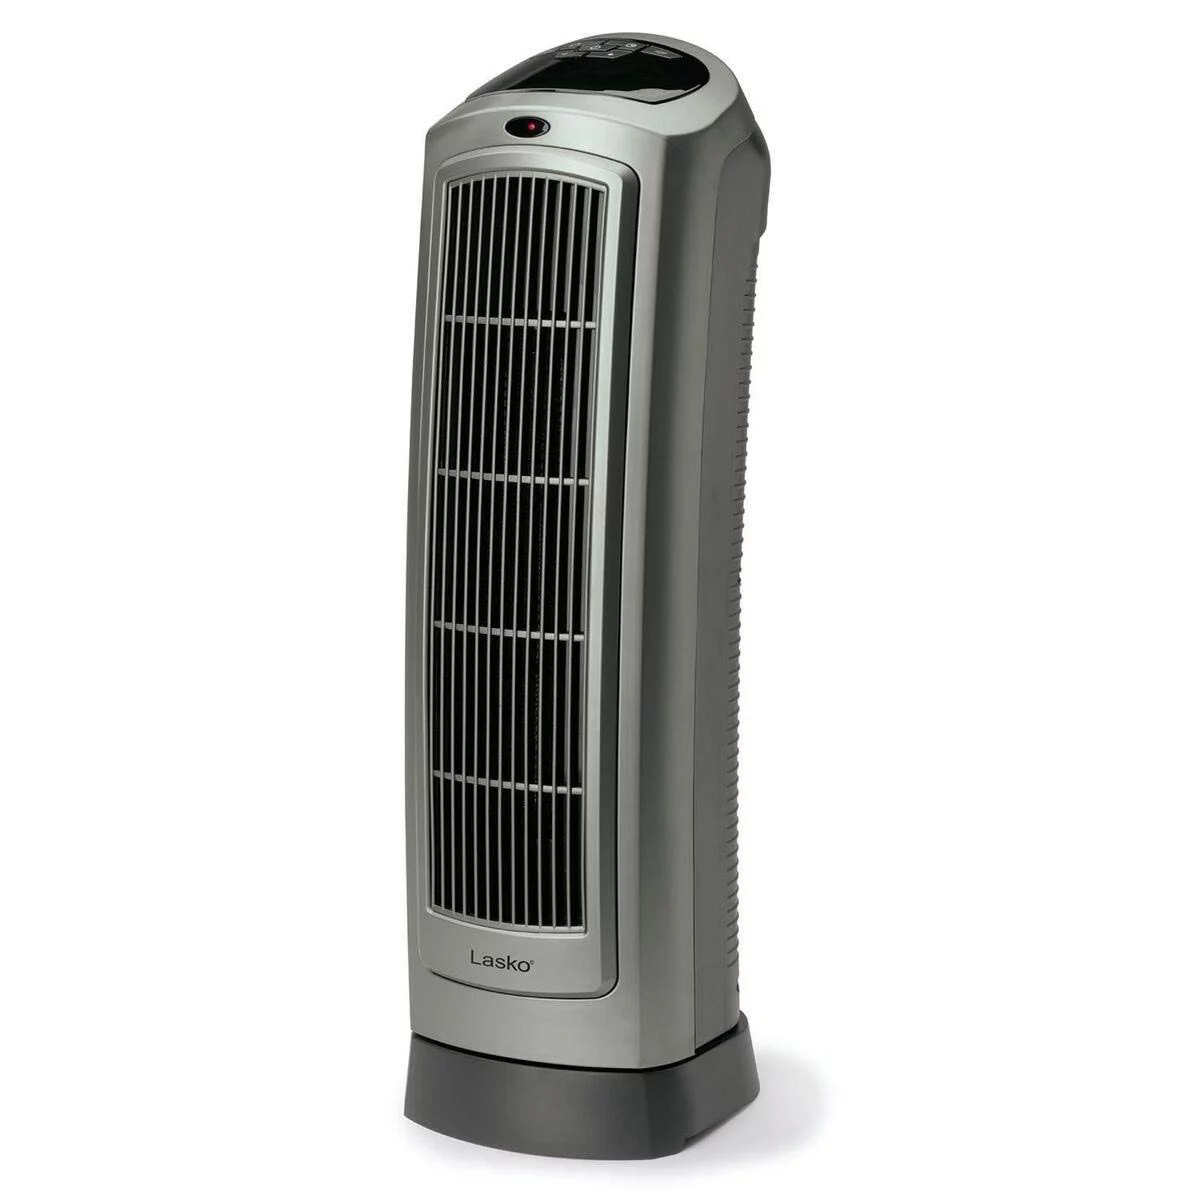 Lasko 1500W Oscillating Ceramic Electric Tower Space Heater with Remote, 5538, Gray, New